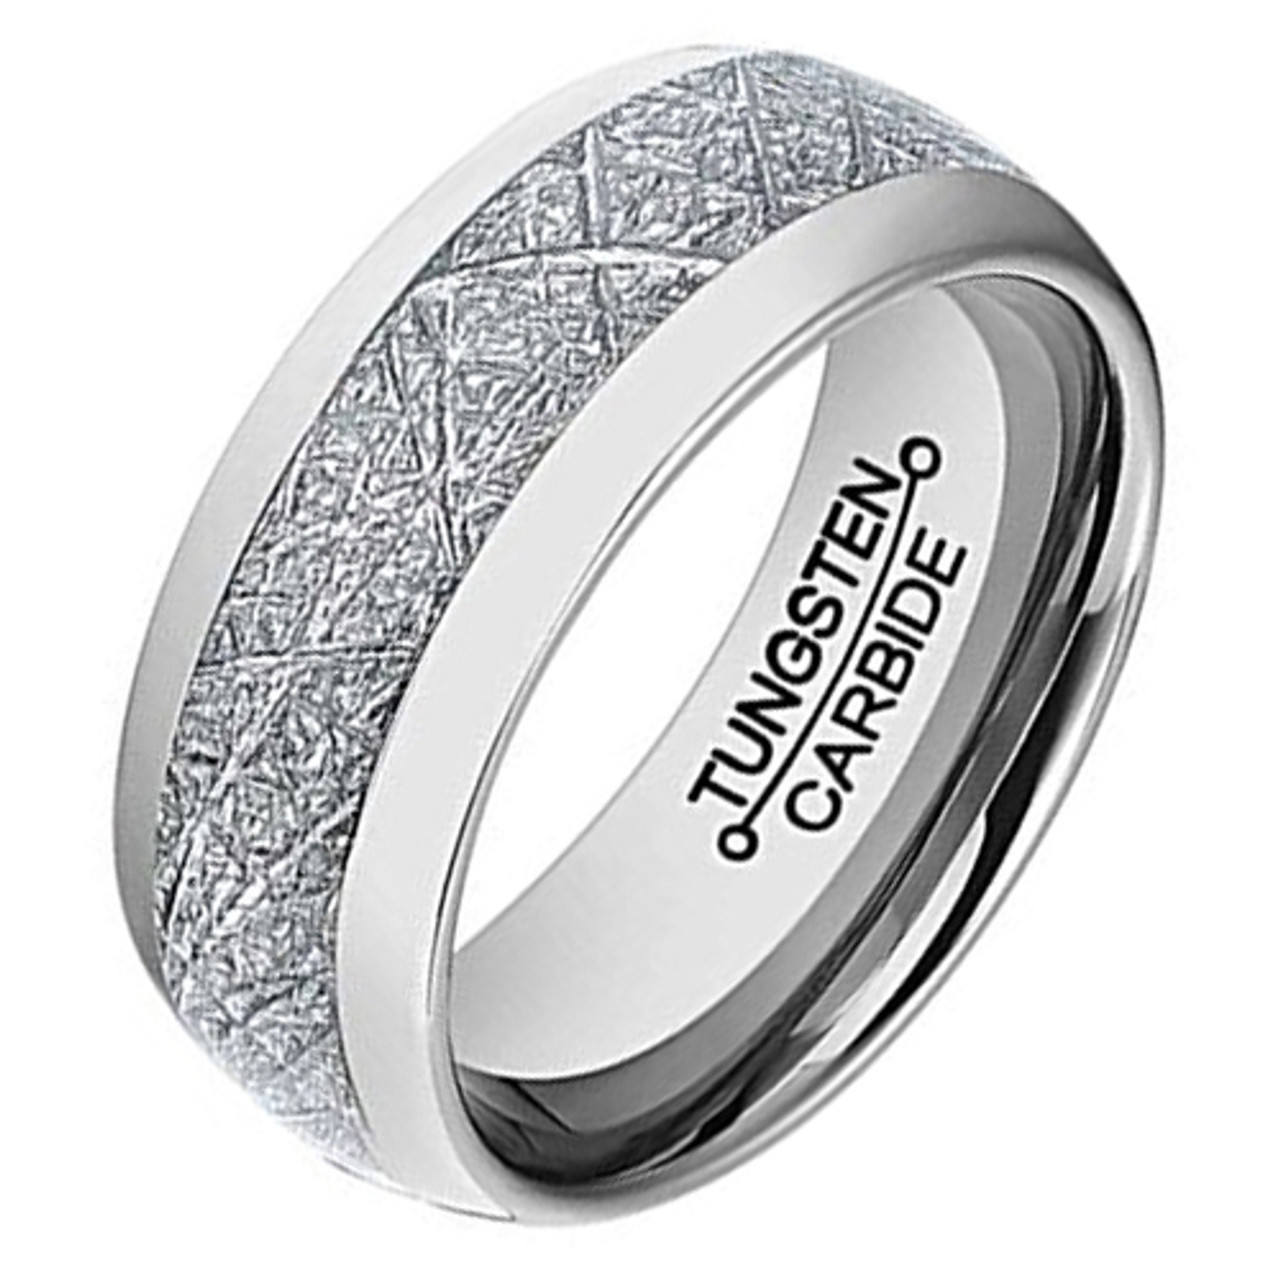 (8mm) Unisex, Women's or Men's Tungsten Carbide Wedding Ring Band. Silver Band with Inspired Meteorite Domed Top. Comfort Fit.